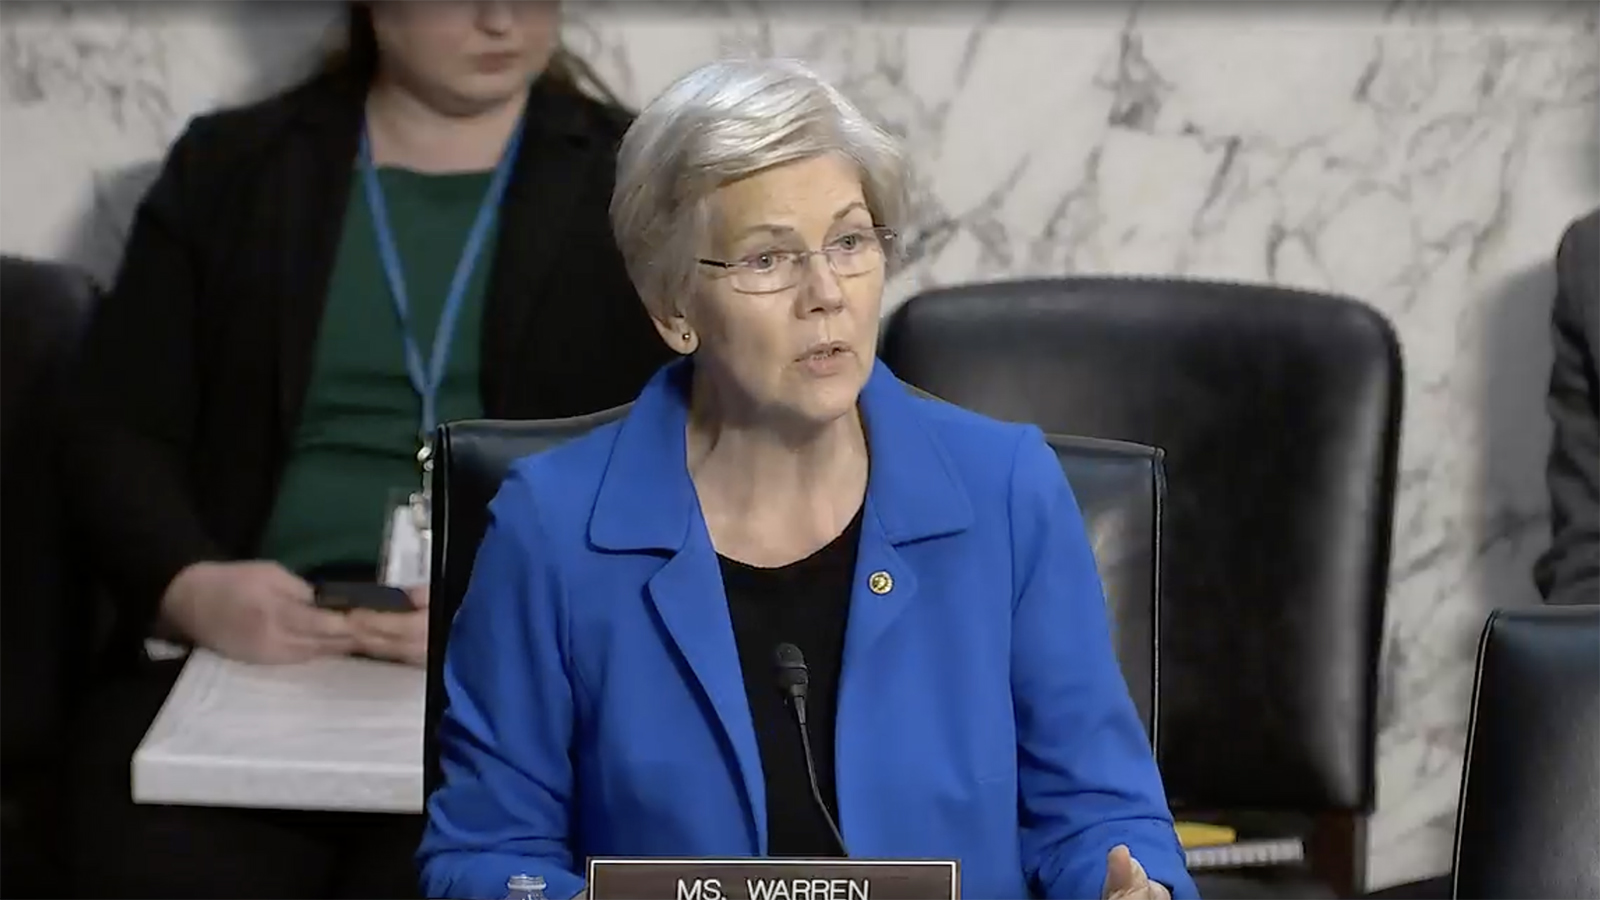 Sen. Elizabeth Warren during the Senate Banking, Housing, and Urban Affairs Committee hearing titled "Annual Oversight of Wall Street Firms" today in Washington, DC.